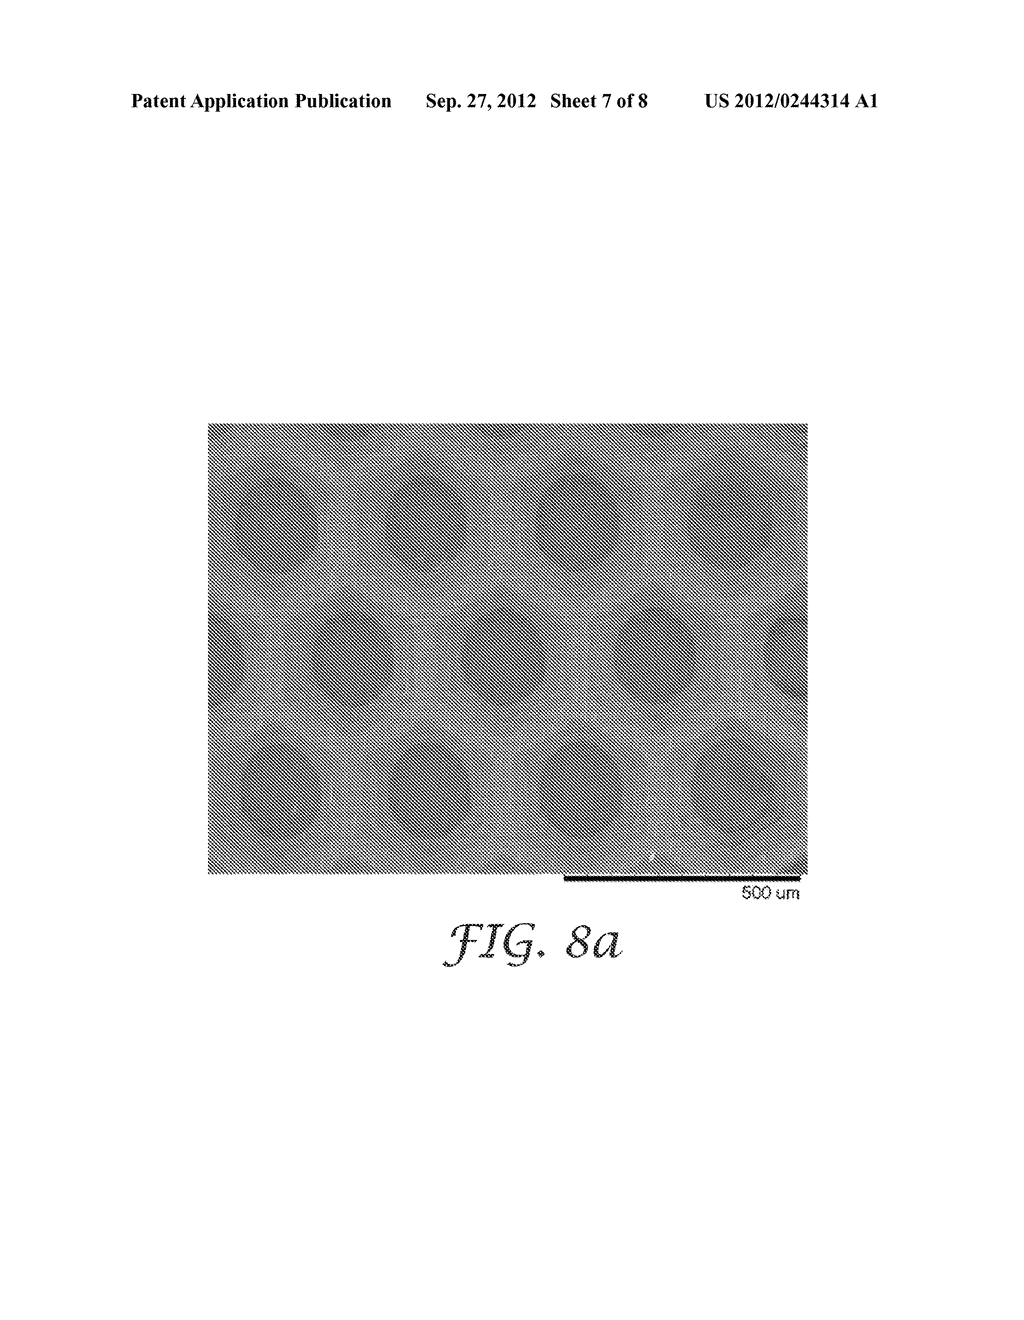 MICROPERFORATED POLYMERIC FILM AND METHODS OF MAKING AND USING THE SAME - diagram, schematic, and image 08